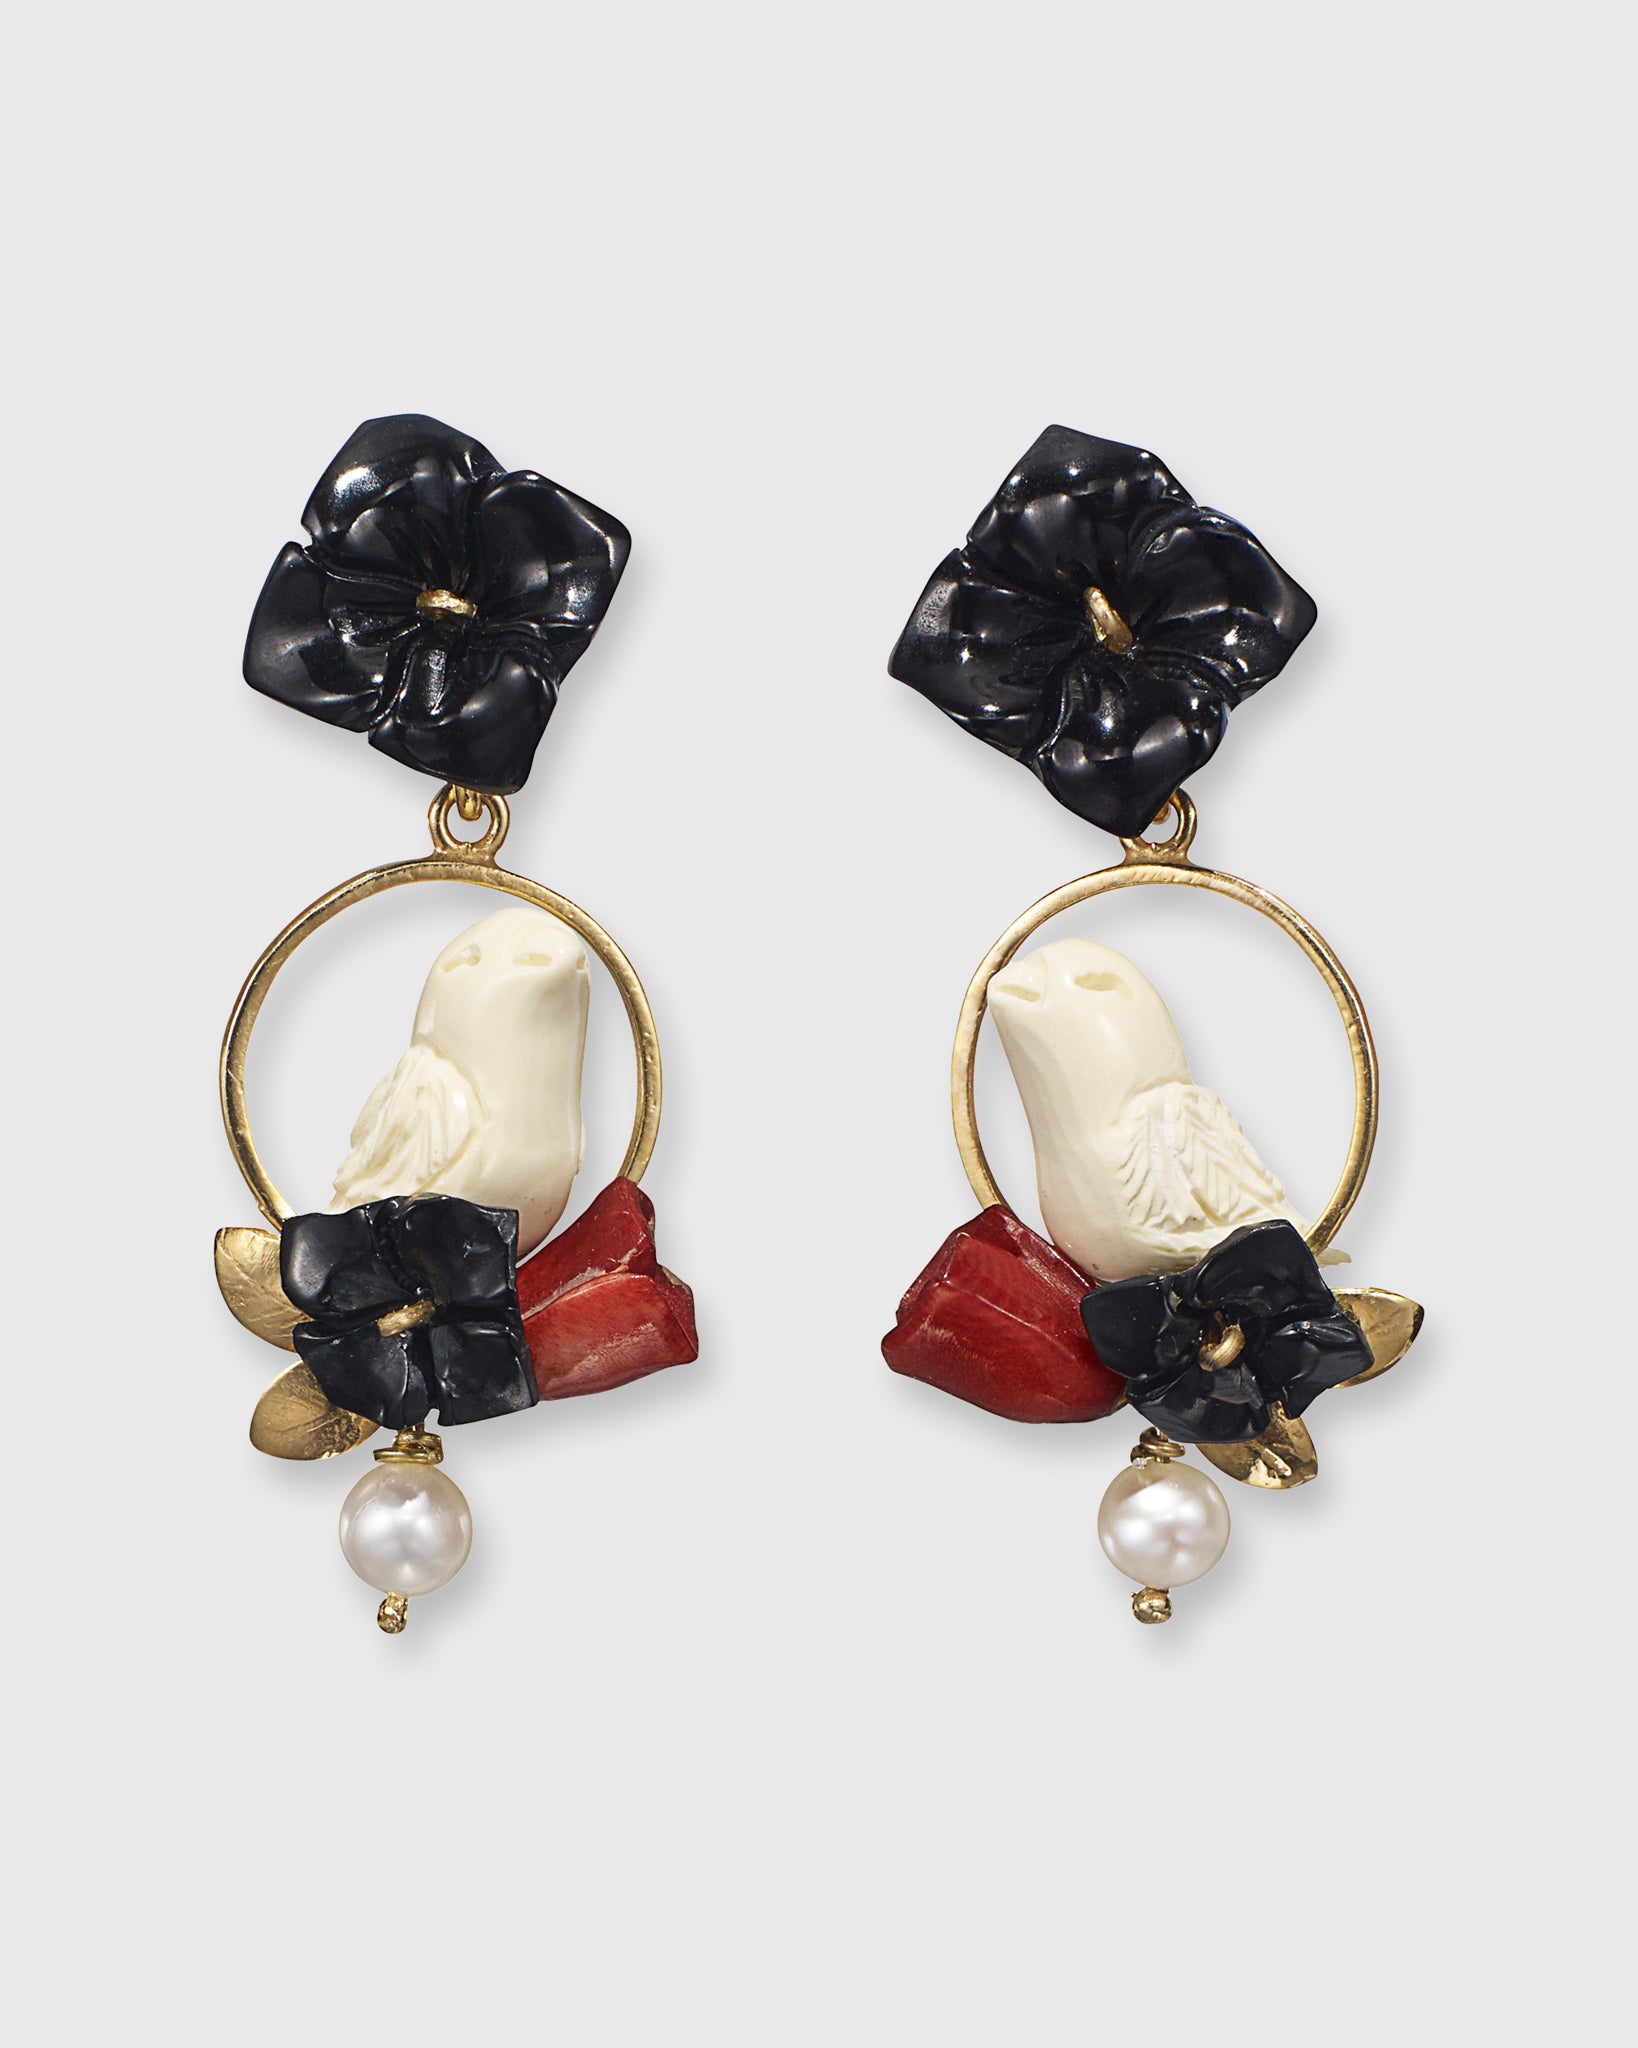 Chick Earrings in Gold/Black/White/Red